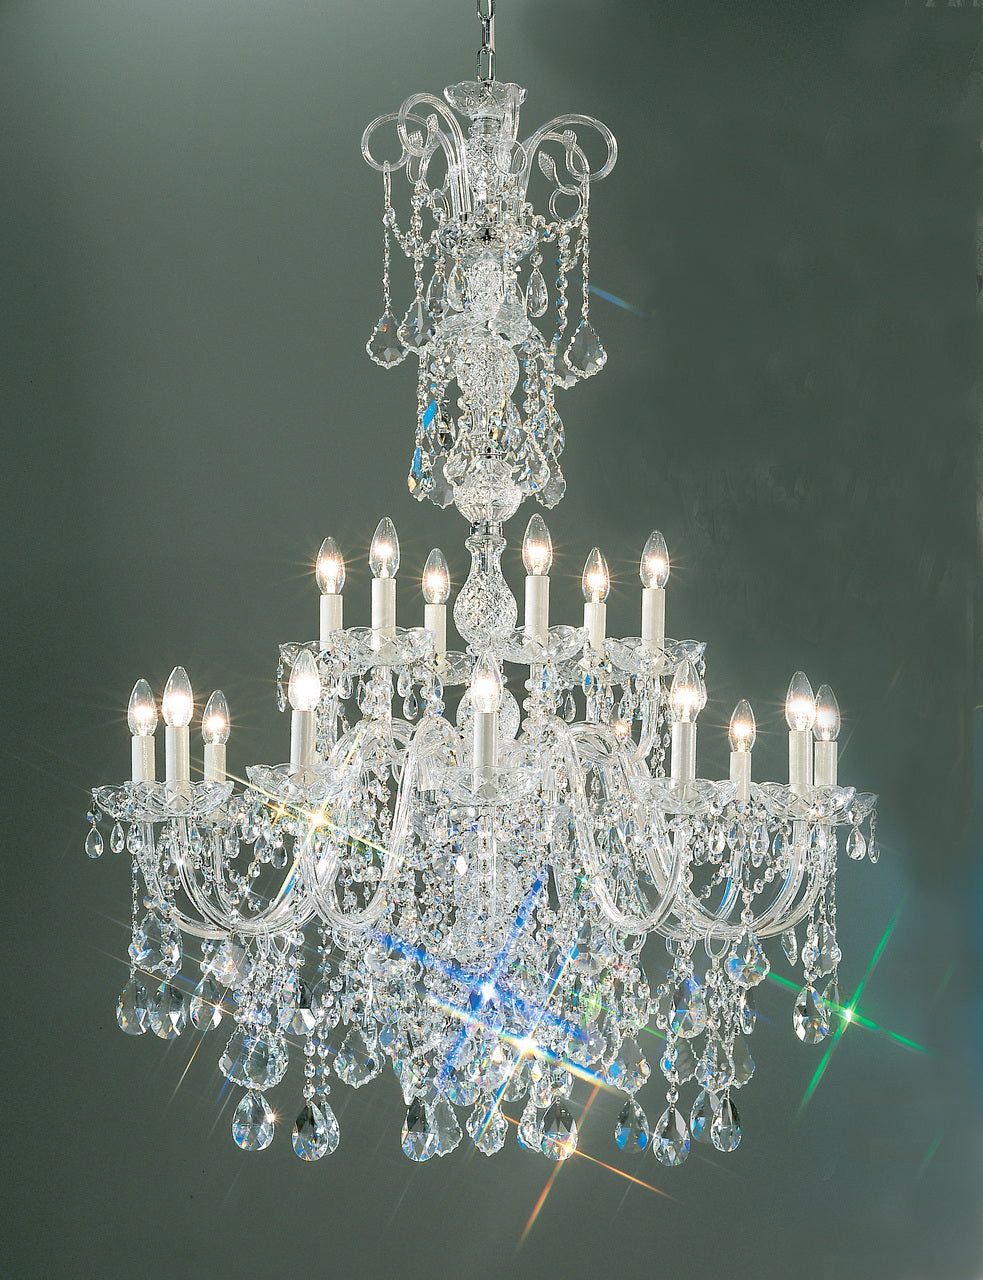 Classic Lighting 8263 G C Bohemia Crystal/Glass Chandelier in 24k Gold (Imported from Italy)